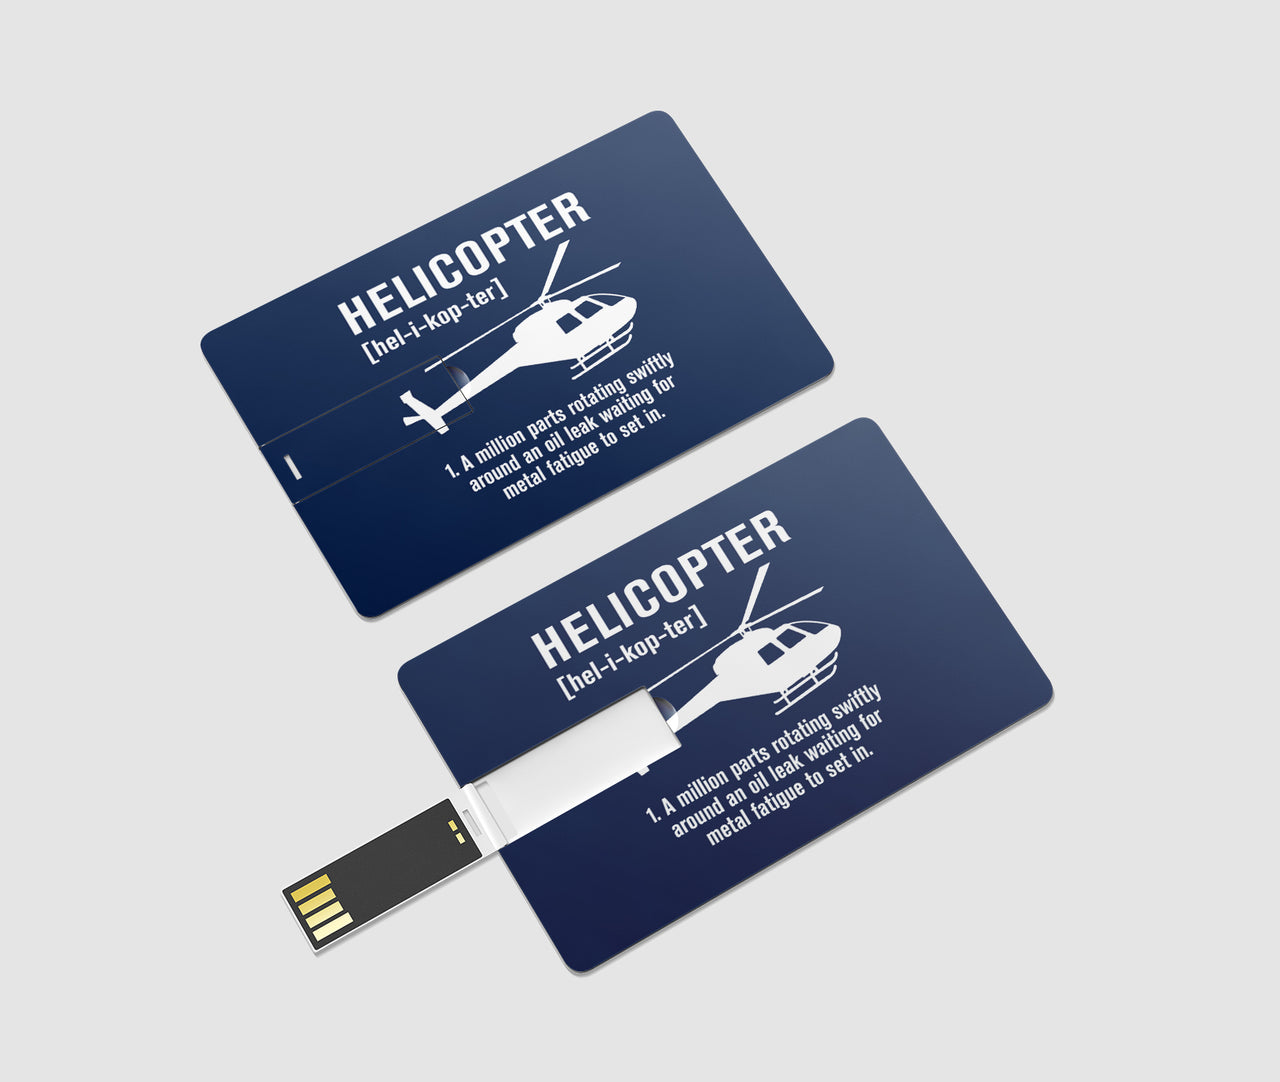 Helicopter [Noun] Designed USB Cards